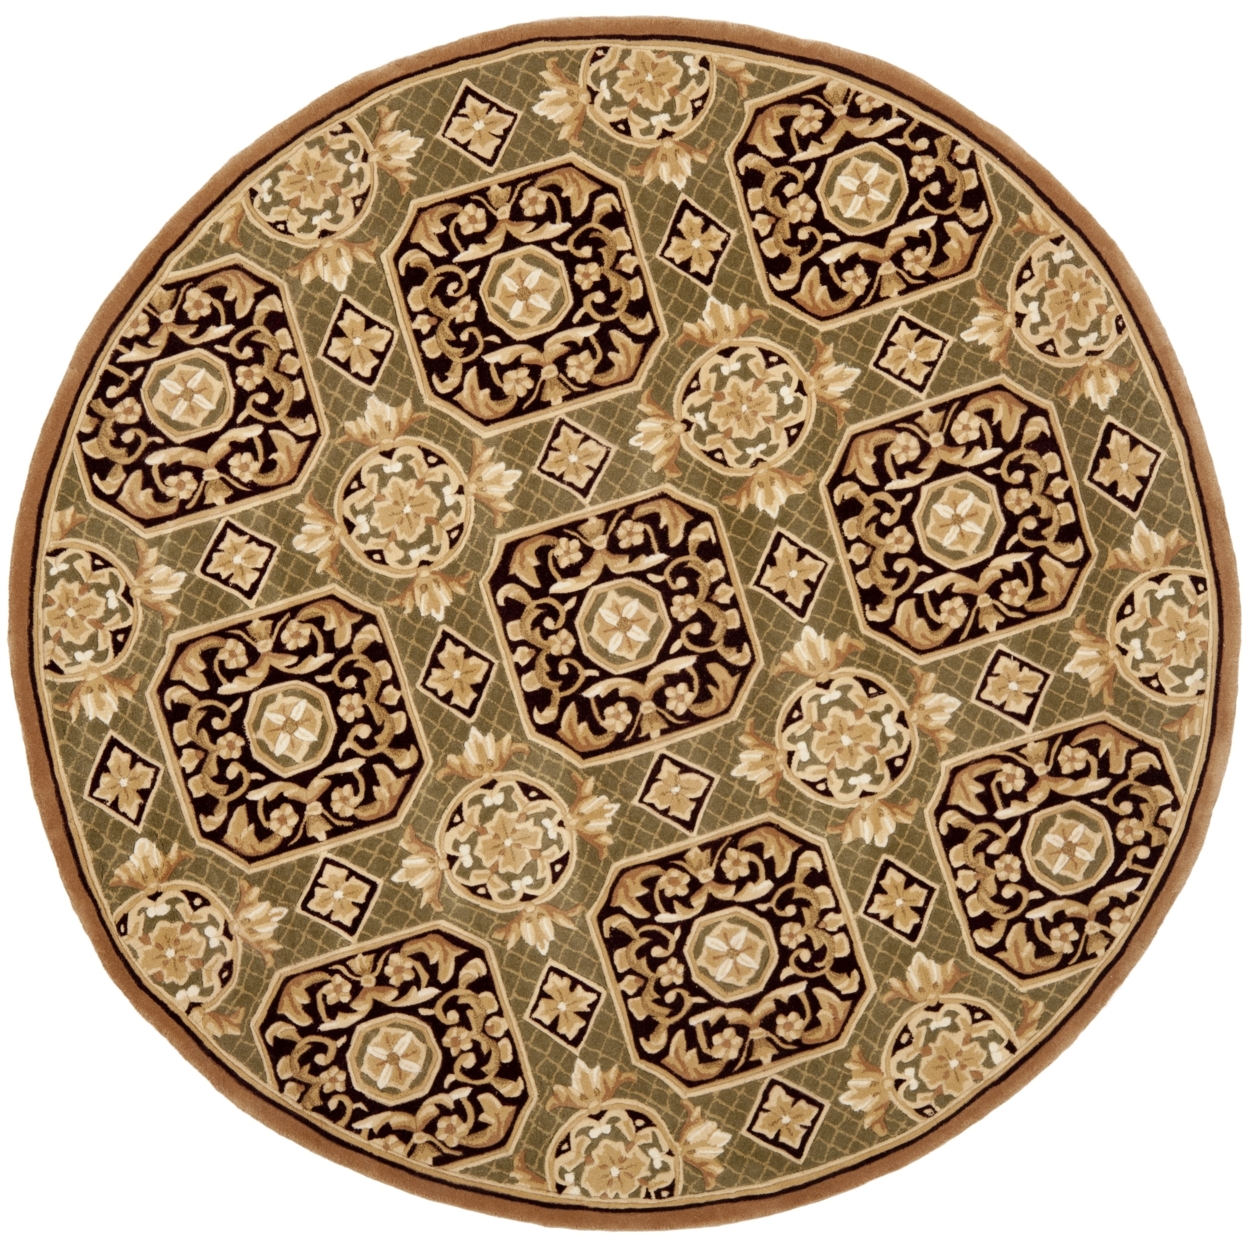 SAFAVIEH Naples Collection NA706A Handmade Assorted Rug - 6' Round